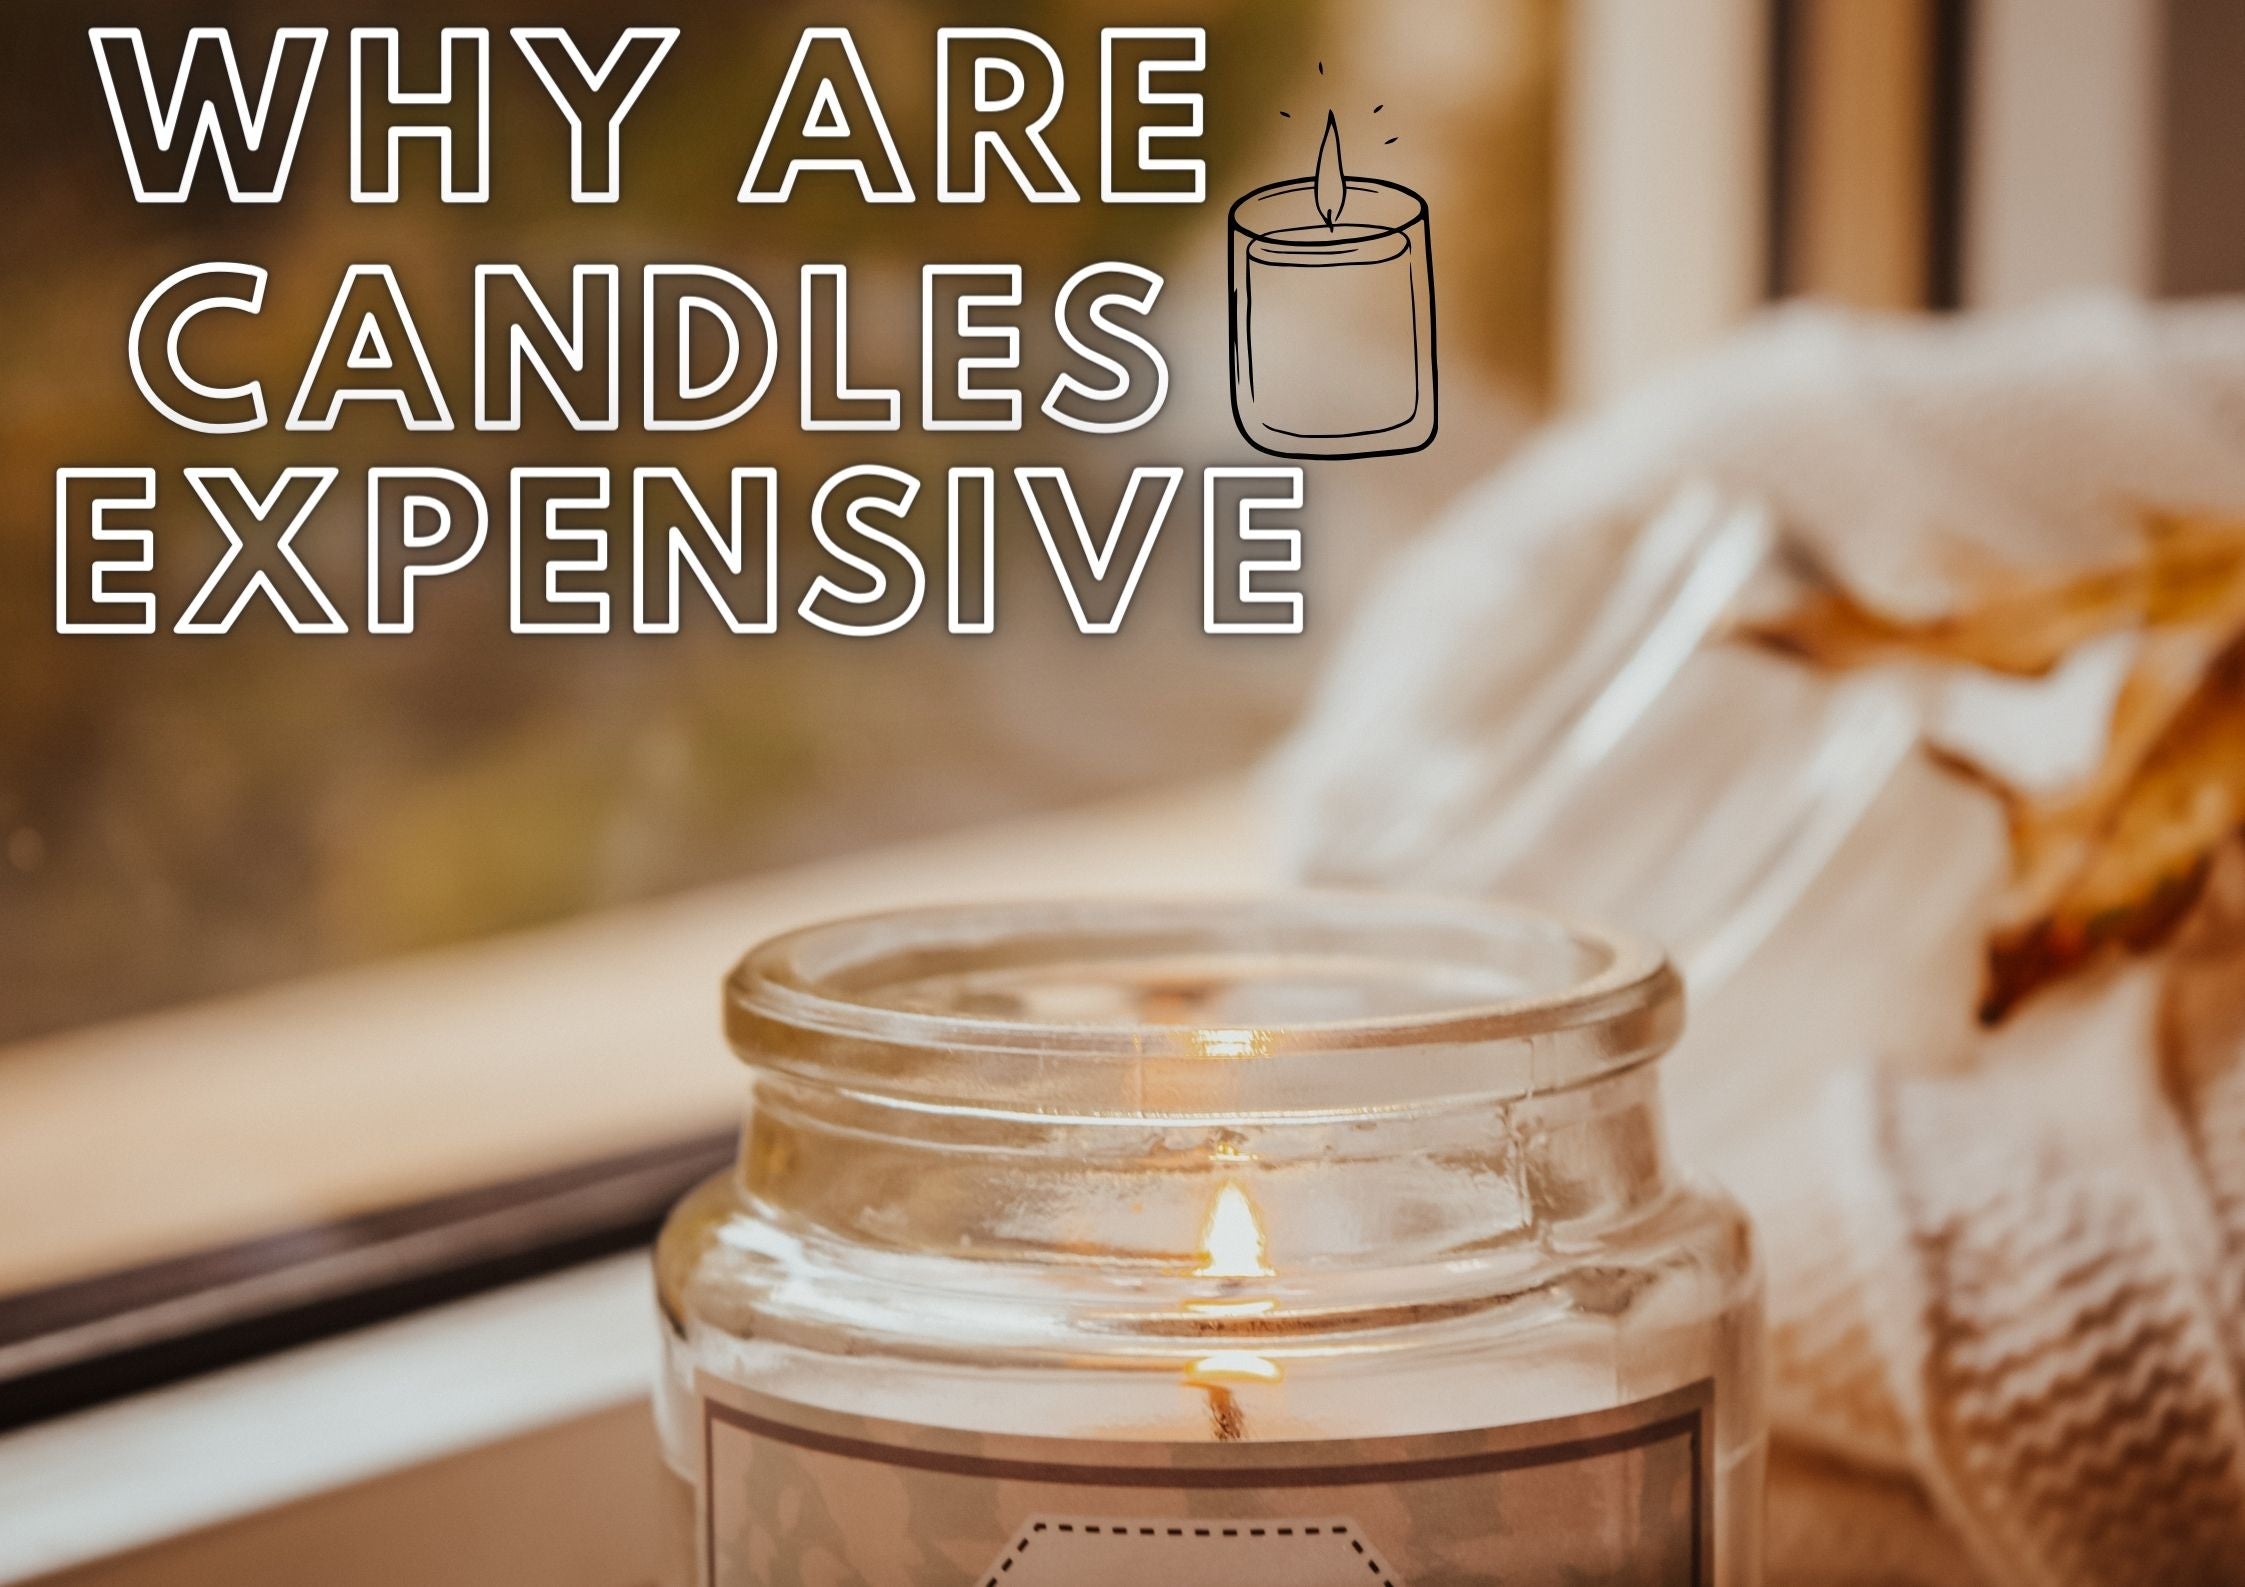 Why are candles so expensive?